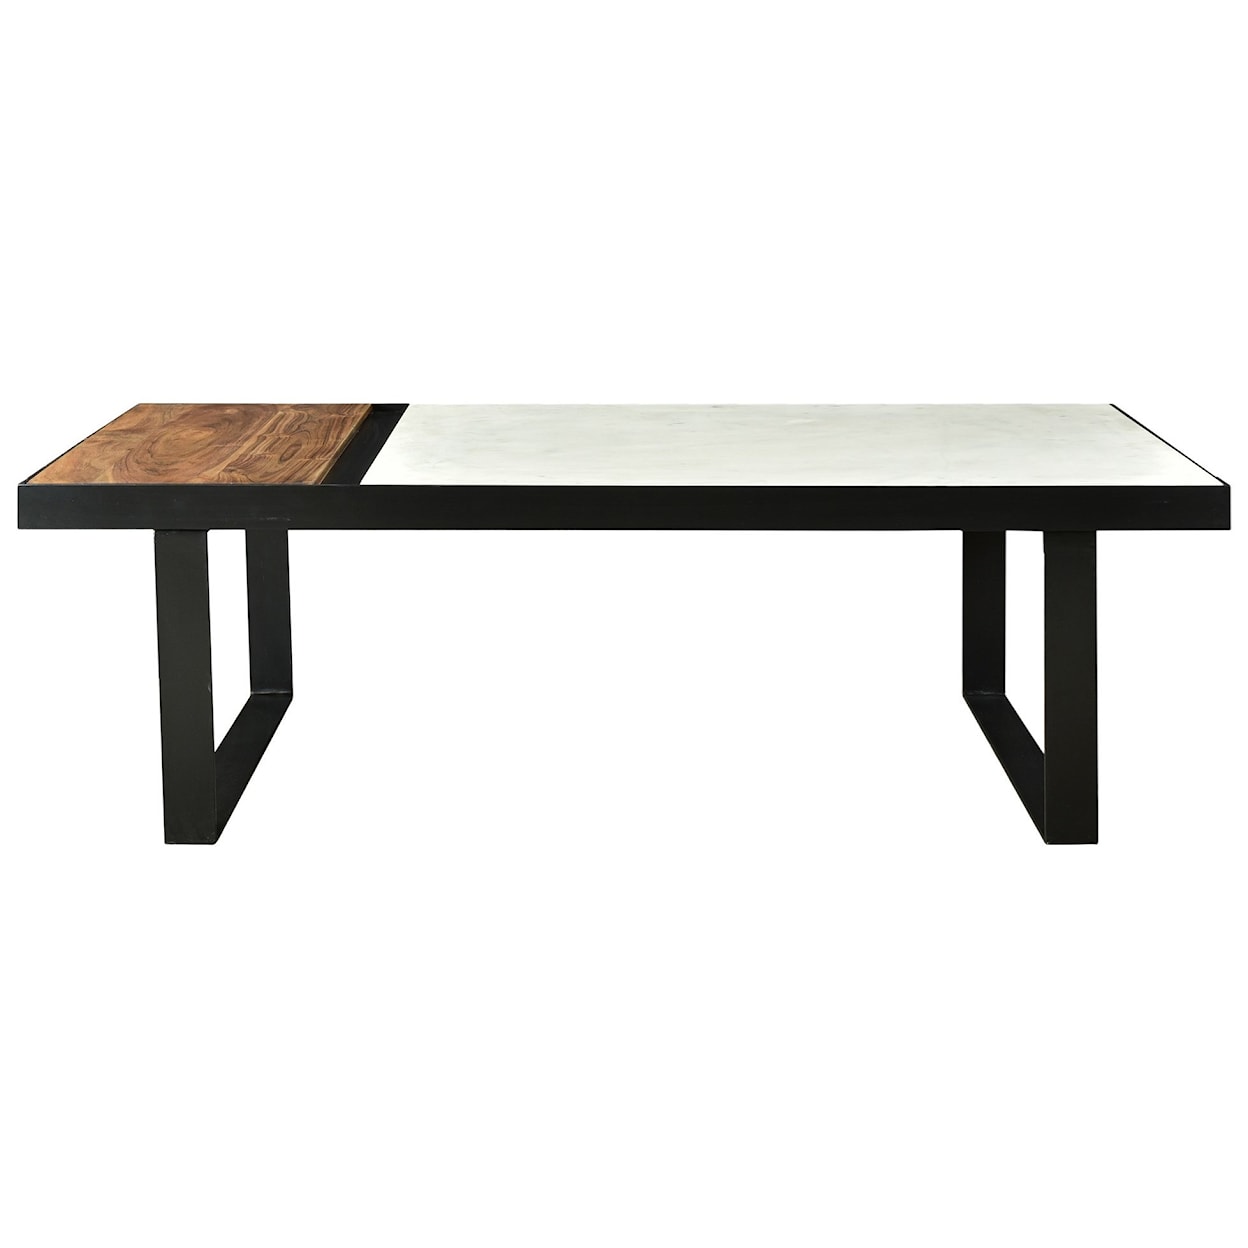 Moe's Home Collection Blox Banswara Marble Coffee Table